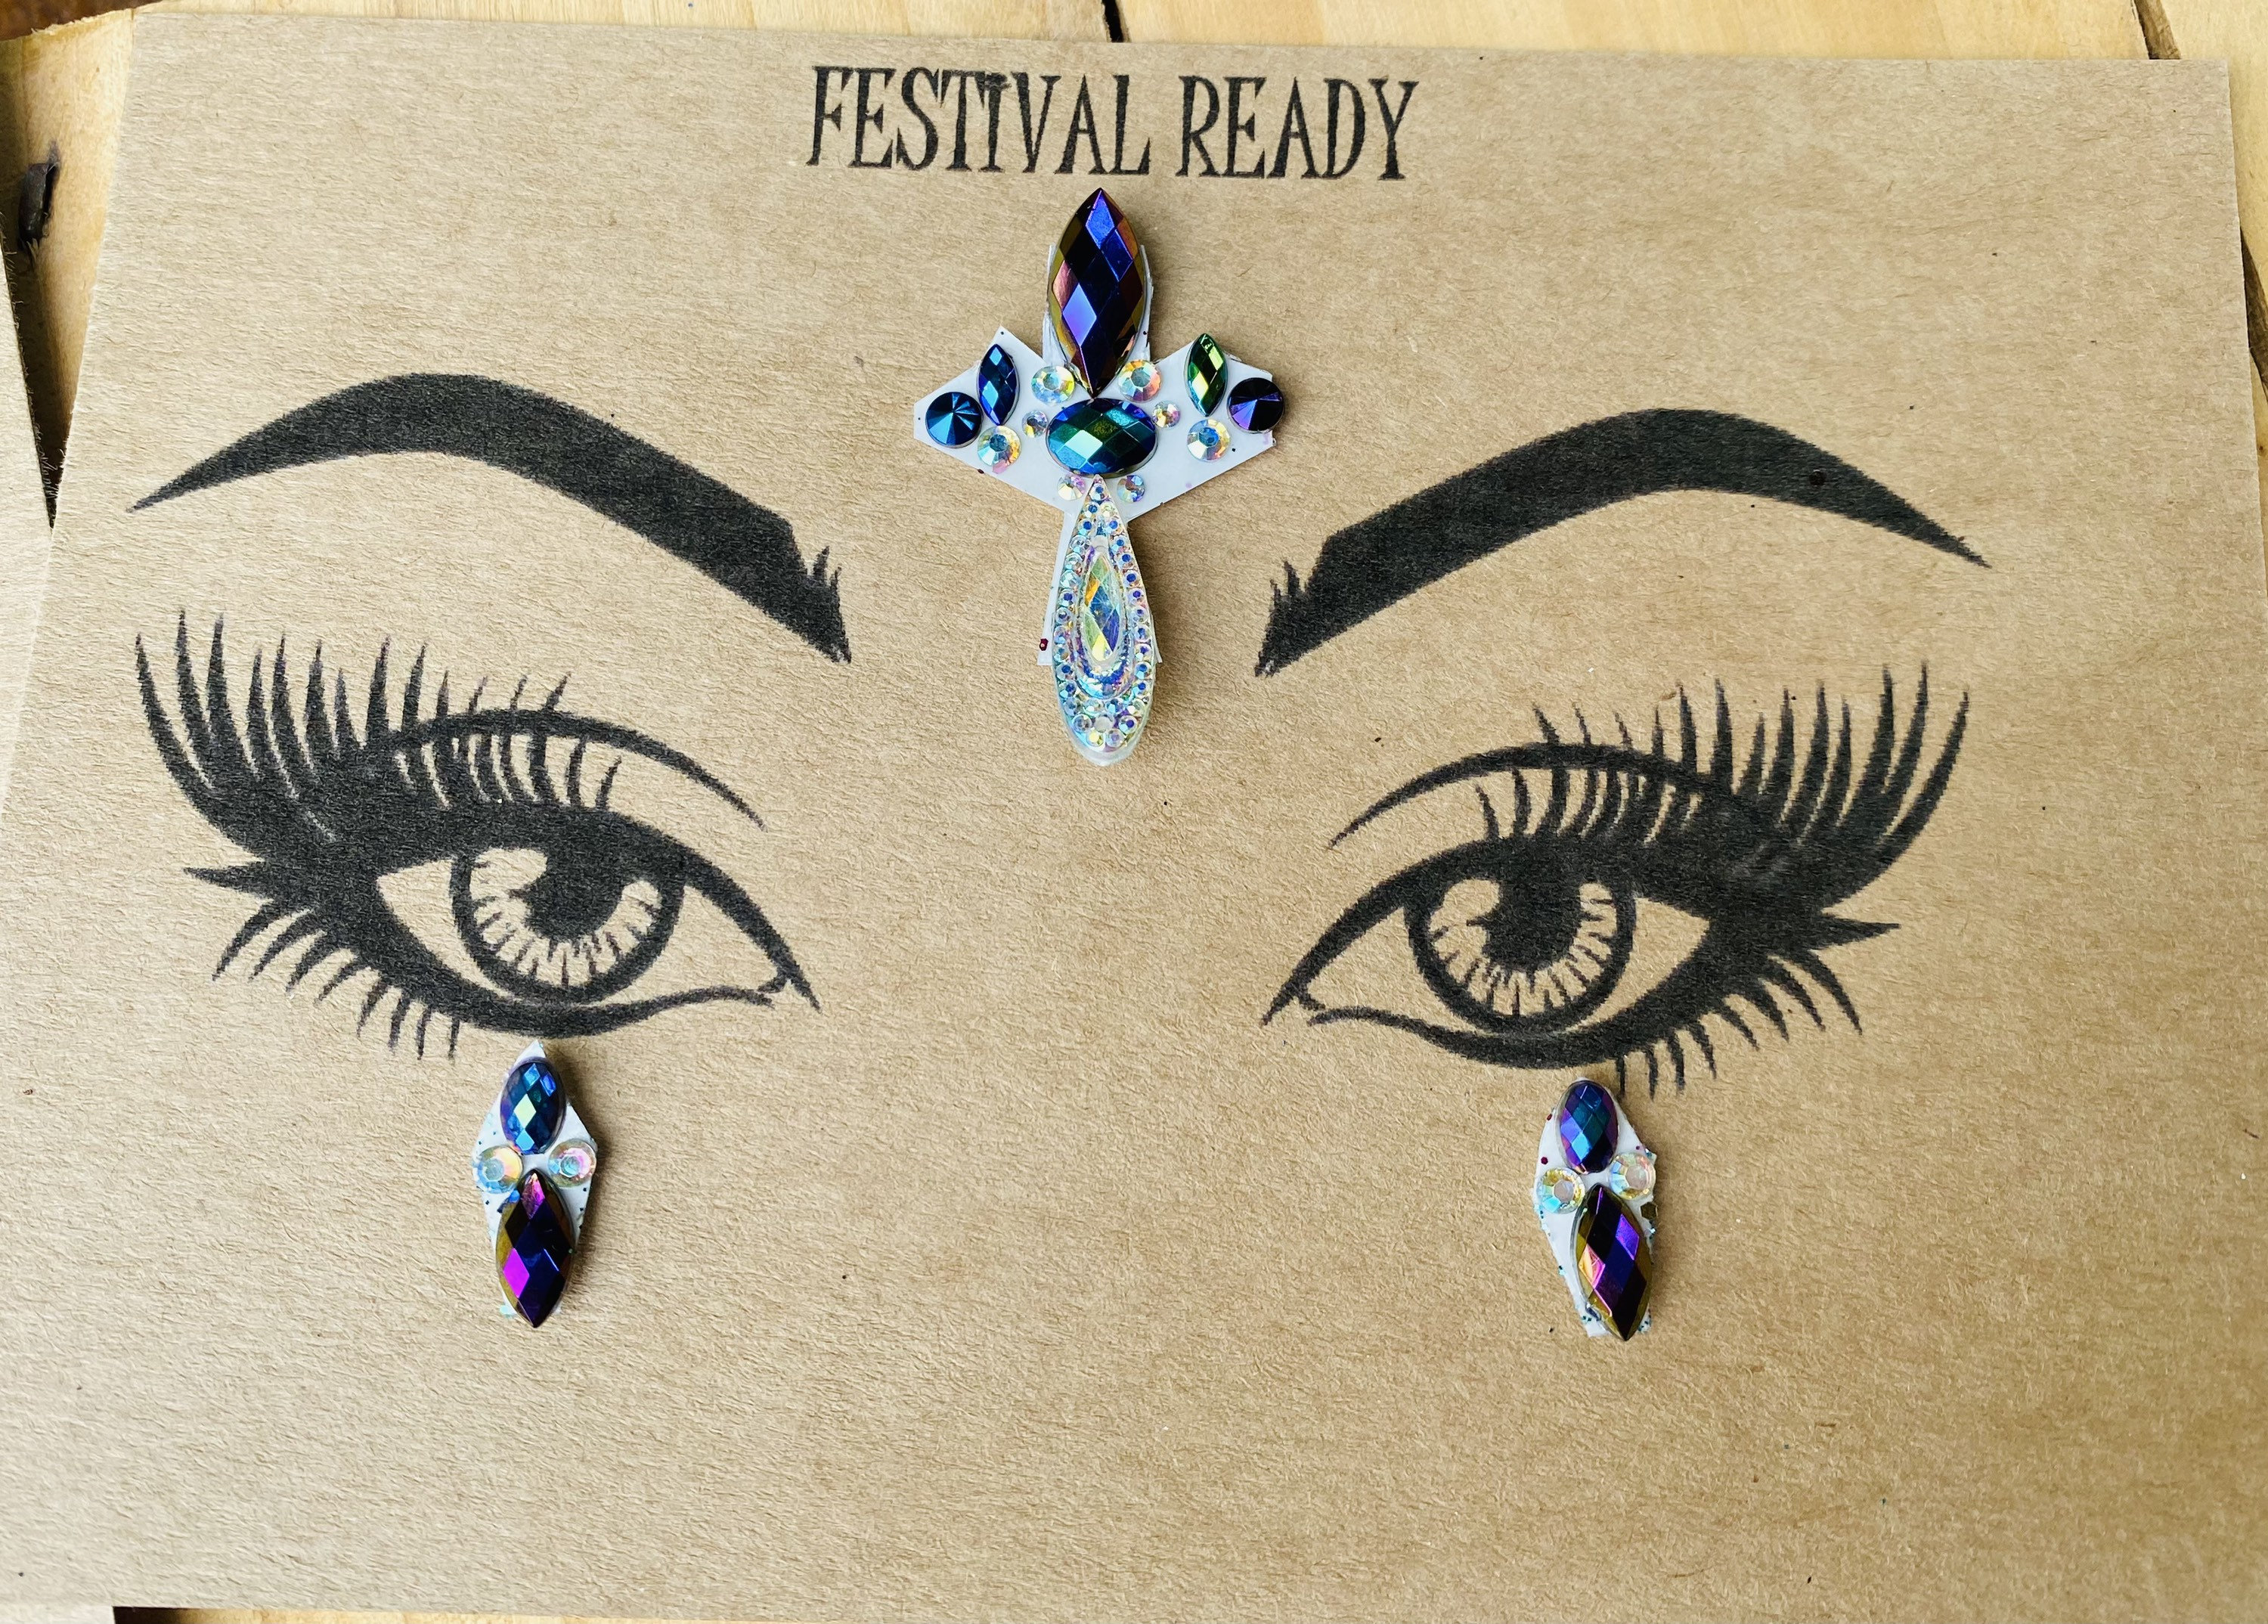 Diamonte Face Gems Party Face Stickers Festival Make up Ready to Use Face  Gems Rave Glitter Crystals Handmadebyxxphoenix 